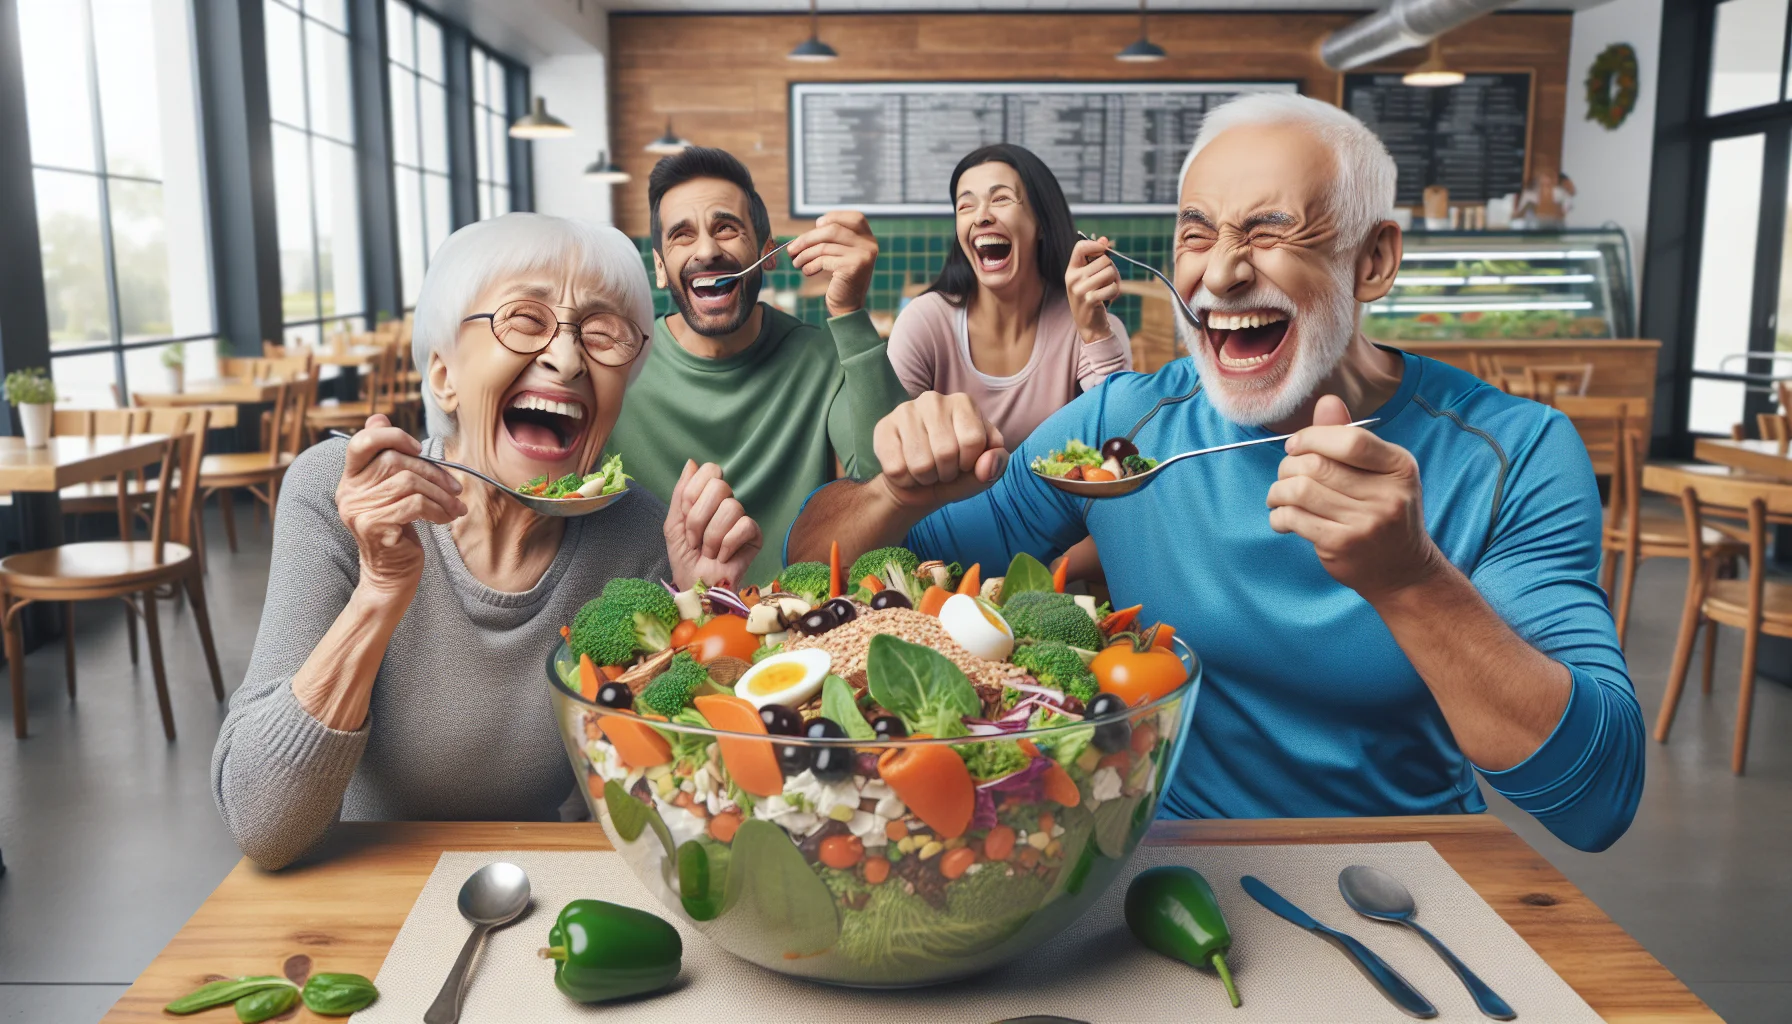 Create a humorous and realistic image of a lively elderly Hispanic woman and a senior Caucasian man, both in sporty attire and are obviously enjoying their time in a brightly lit cafe. They are laughing out loud while sharing a significantly oversized bowl of salad greens, vegetables, and whole grains that is so big it barely fits on the table. Detailed amusing elements such as the man trying to use a giant spoon and the woman holding an enormous fork, as well as their surprised expressions at the serving size. All around them are visibly health-conscious diners of varying ages and ethnicities, who are smiling at the amusing spectacle.